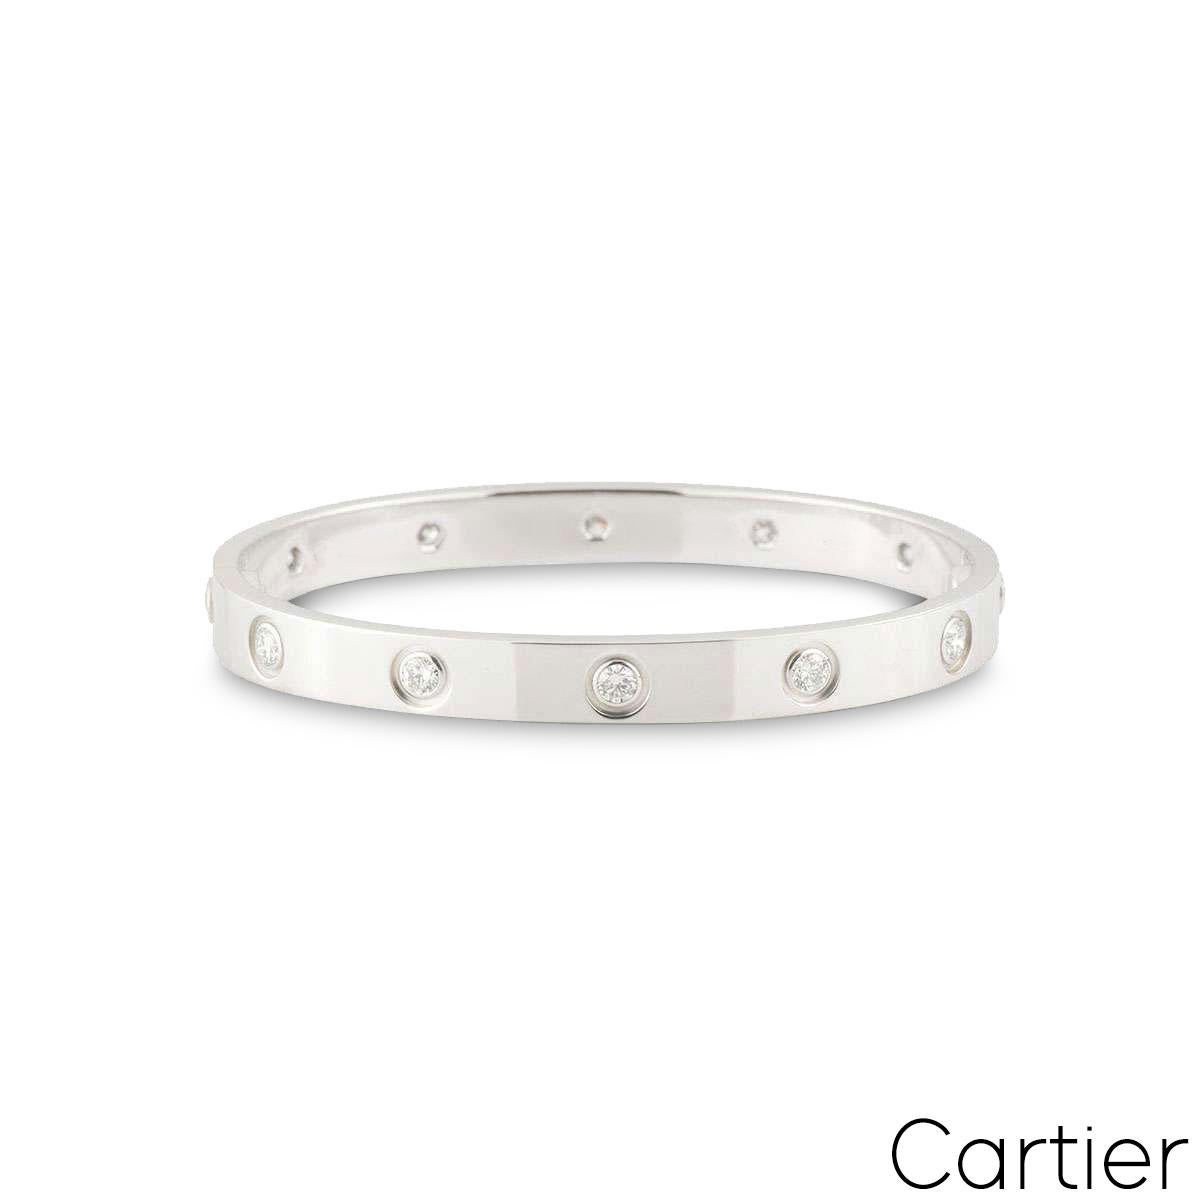 An 18k white gold full diamond Cartier bracelet from the Love collection. The bracelet is set with 10 round brilliant cut diamonds circulating the outer edge throughout in a rubover setting. The bracelet is size 17 and features the new style screw